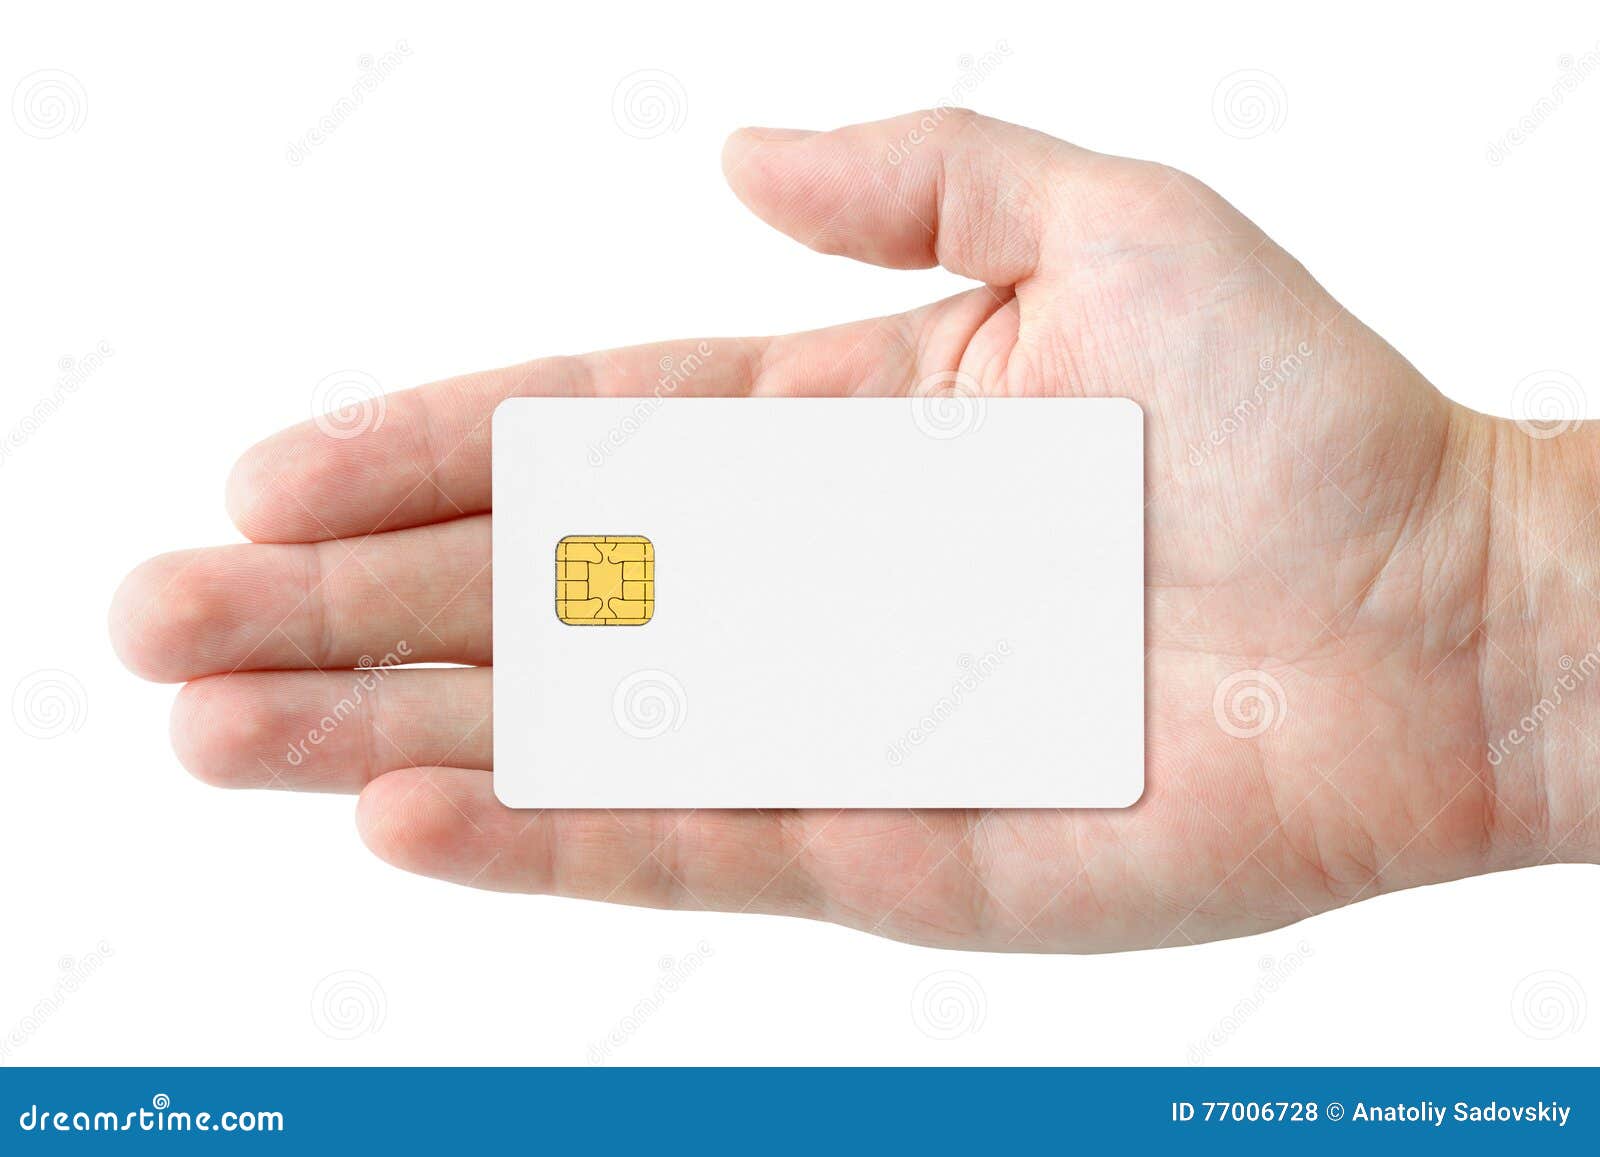 blank-credit-card-in-hand-stock-photo-image-of-card-77006728